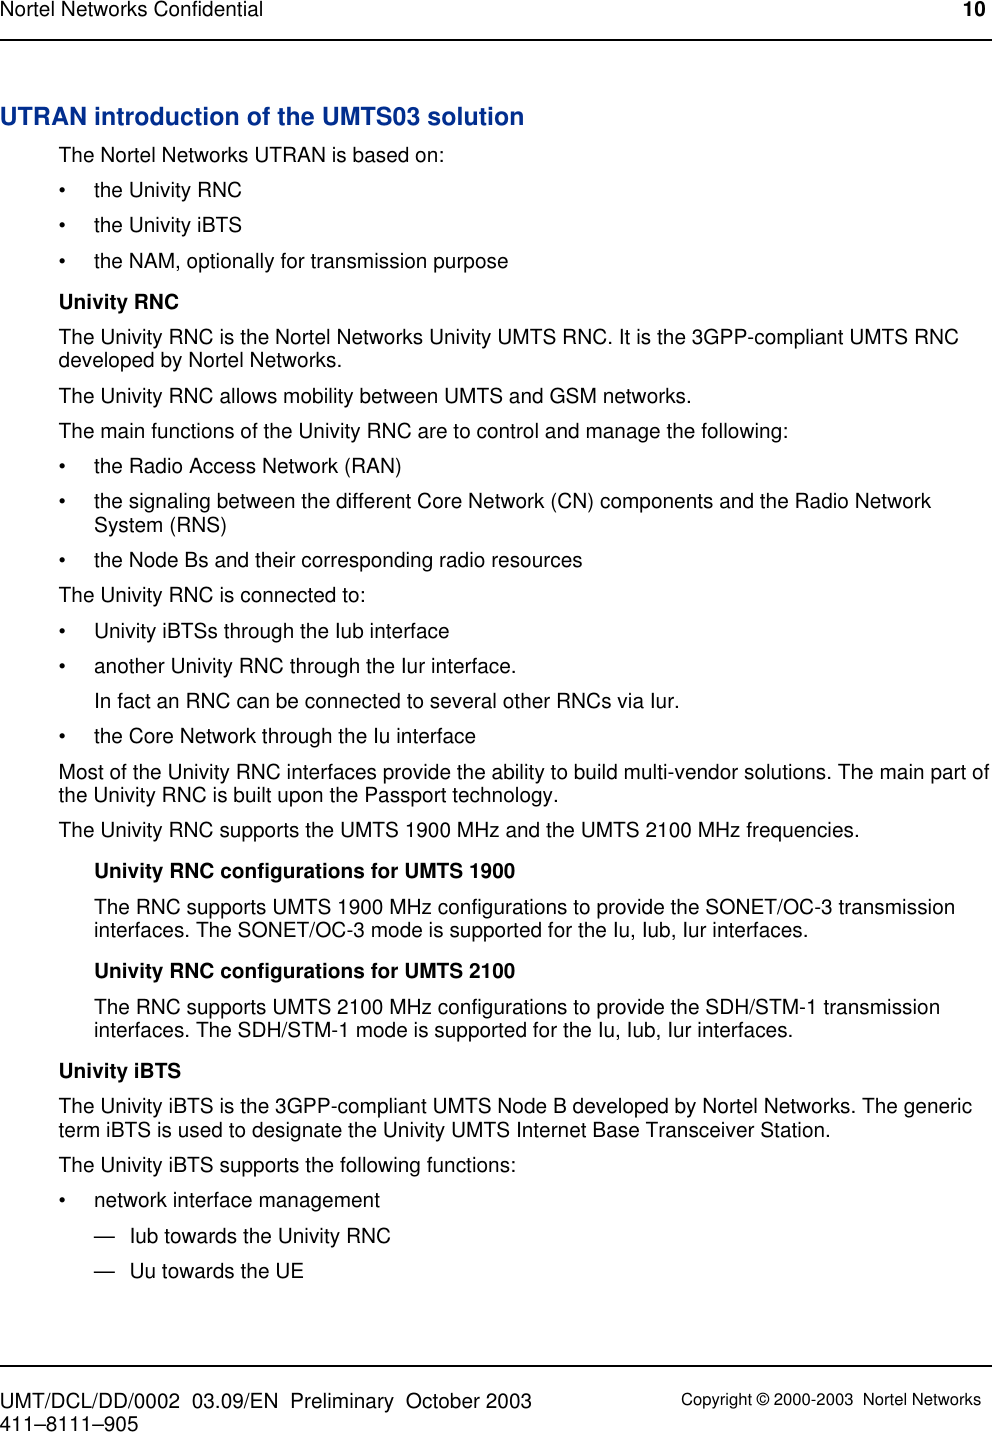 UTRAN introduction of the UMTS03 solutionThe Nortel Networks UTRAN is based on:• the Univity RNC• the Univity iBTS• the NAM, optionally for transmission purposeUnivity RNCThe Univity RNC is the Nortel Networks Univity UMTS RNC. It is the 3GPP-compliant UMTS RNCdeveloped by Nortel Networks.The Univity RNC allows mobility between UMTS and GSM networks.The main functions of the Univity RNC are to control and manage the following:• the Radio Access Network (RAN)• the signaling between the different Core Network (CN) components and the Radio NetworkSystem (RNS)• the Node Bs and their corresponding radio resourcesThe Univity RNC is connected to:• Univity iBTSs through the Iub interface• another Univity RNC through the Iur interface.In fact an RNC can be connected to several other RNCs via Iur.• the Core Network through the Iu interfaceMost of the Univity RNC interfaces provide the ability to build multi-vendor solutions. The main part ofthe Univity RNC is built upon the Passport technology.The Univity RNC supports the UMTS 1900 MHz and the UMTS 2100 MHz frequencies.Univity RNC configurations for UMTS 1900The RNC supports UMTS 1900 MHz configurations to provide the SONET/OC-3 transmissioninterfaces. The SONET/OC-3 mode is supported for the Iu, Iub, Iur interfaces.Univity RNC configurations for UMTS 2100The RNC supports UMTS 2100 MHz configurations to provide the SDH/STM-1 transmissioninterfaces. The SDH/STM-1 mode is supported for the Iu, Iub, Iur interfaces.Univity iBTSThe Univity iBTS is the 3GPP-compliant UMTS Node B developed by Nortel Networks. The genericterm iBTS is used to designate the Univity UMTS Internet Base Transceiver Station.The Univity iBTS supports the following functions:• network interface management— Iub towards the Univity RNC— Uu towards the UENortel Networks Confidential 10UMT/DCL/DD/0002 03.09/EN Preliminary October 2003 Copyright © 2000-2003 Nortel Networks411–8111–905